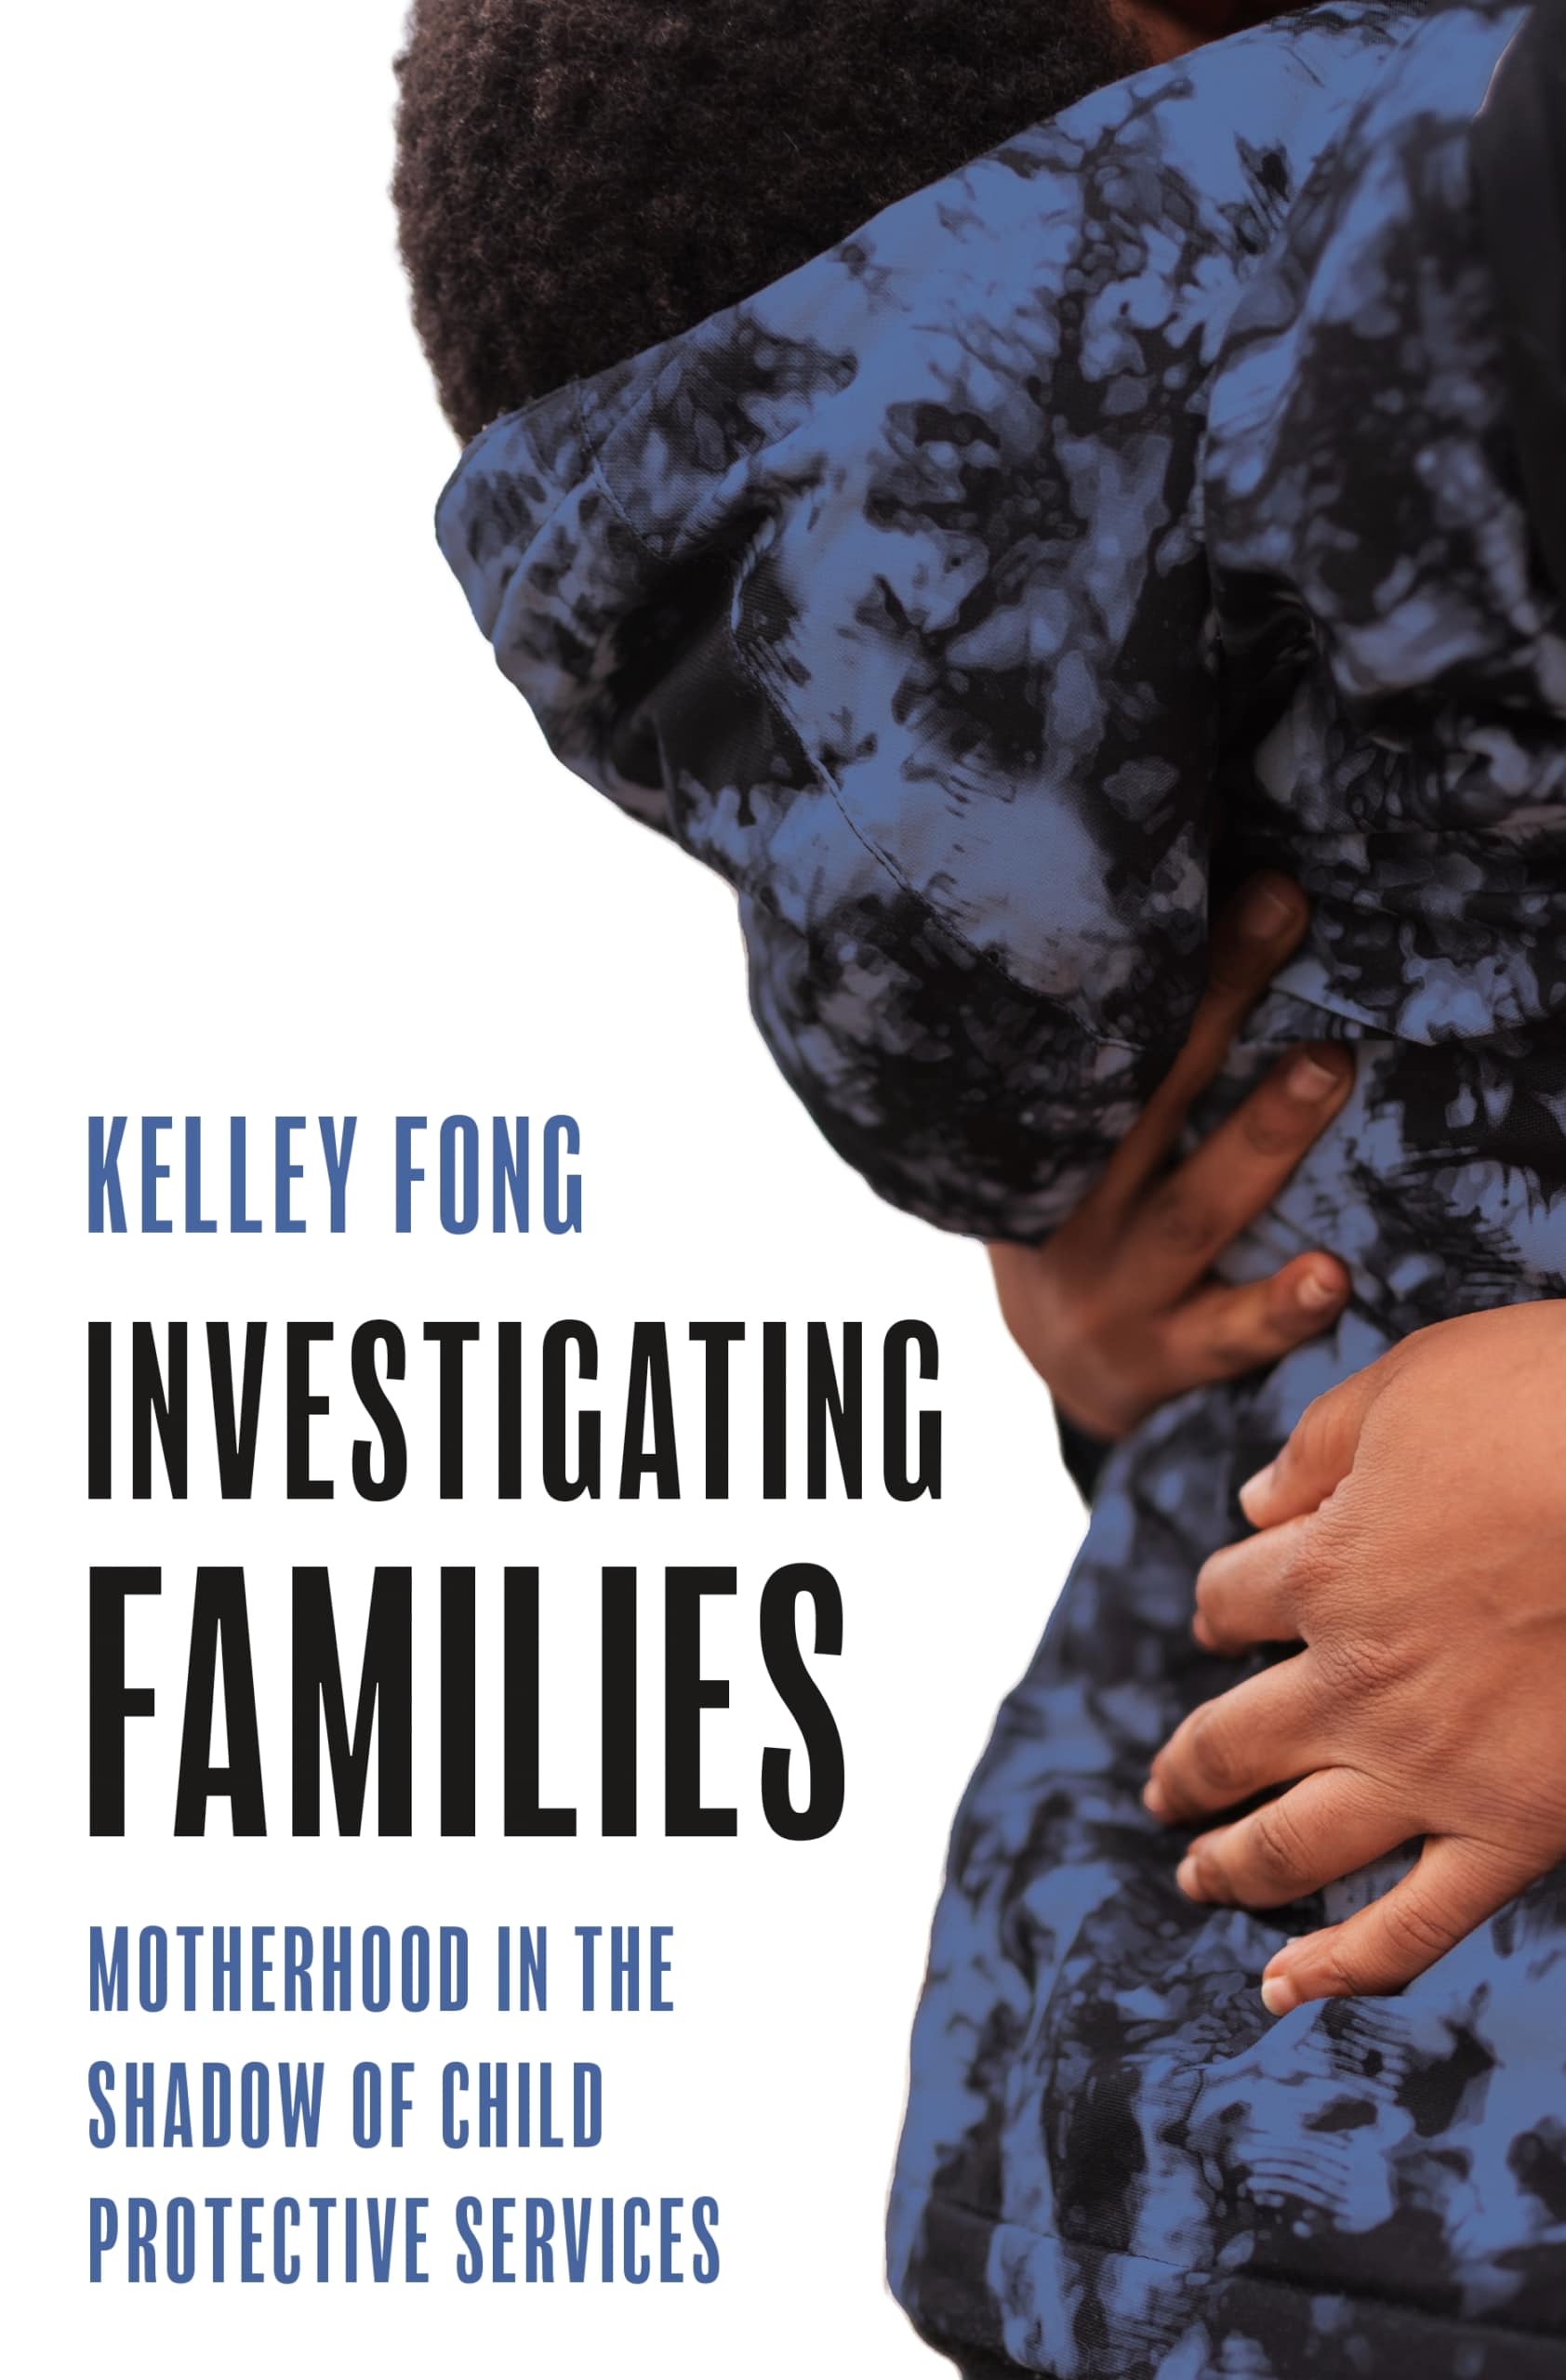 Investigating Families book cover by Kelley Fong shows the back view of an adult hugging a child.